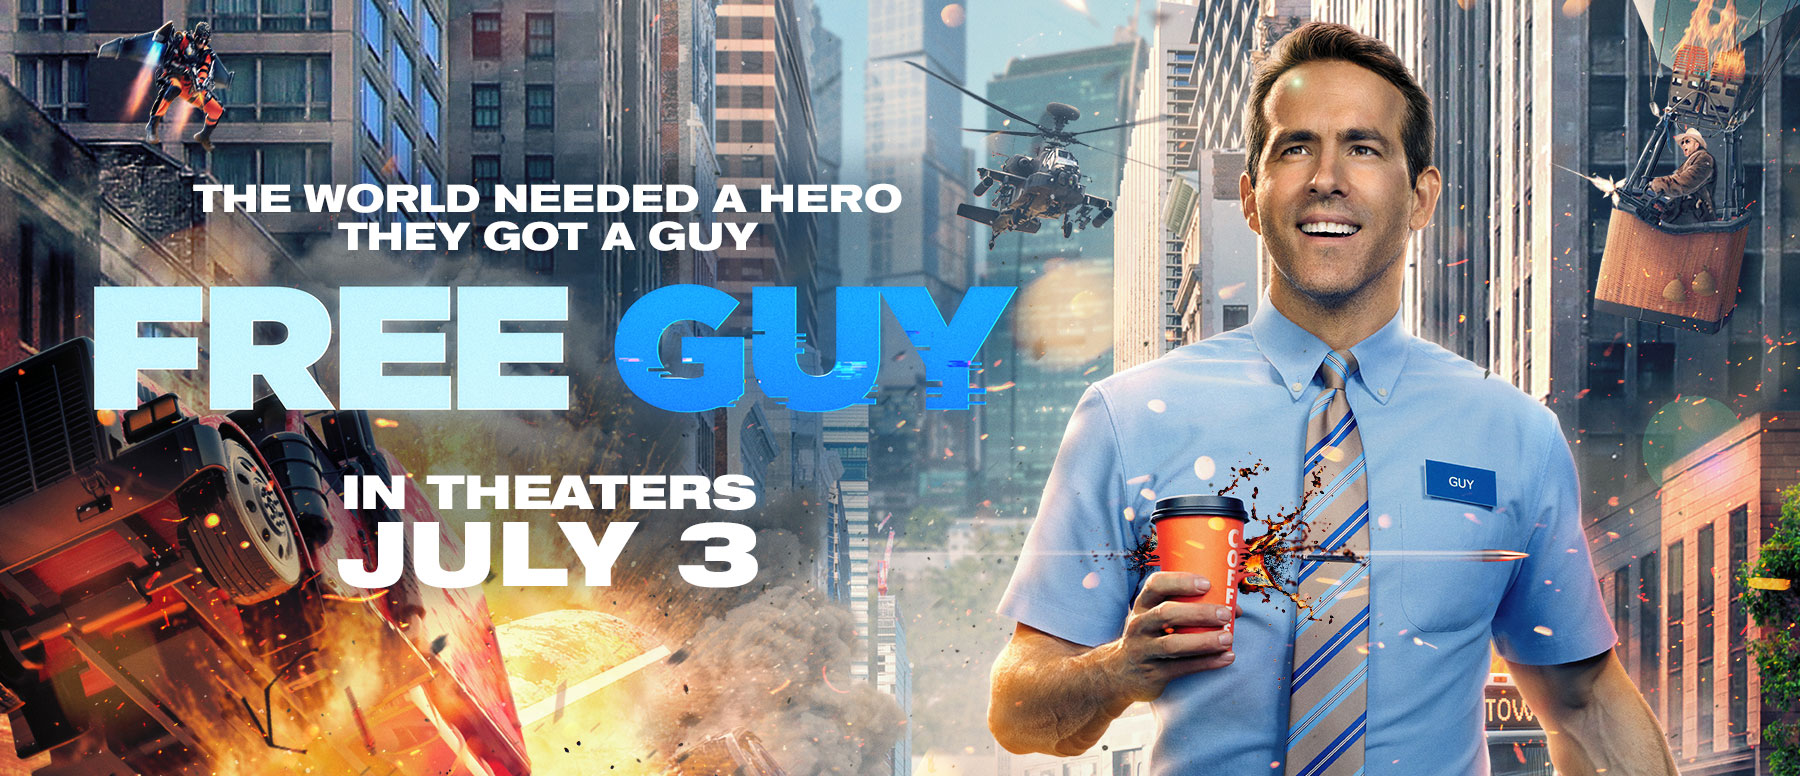 Ryan Reynolds Is Free Guy: New Trailer & Poster Released - MickeyBlog.com